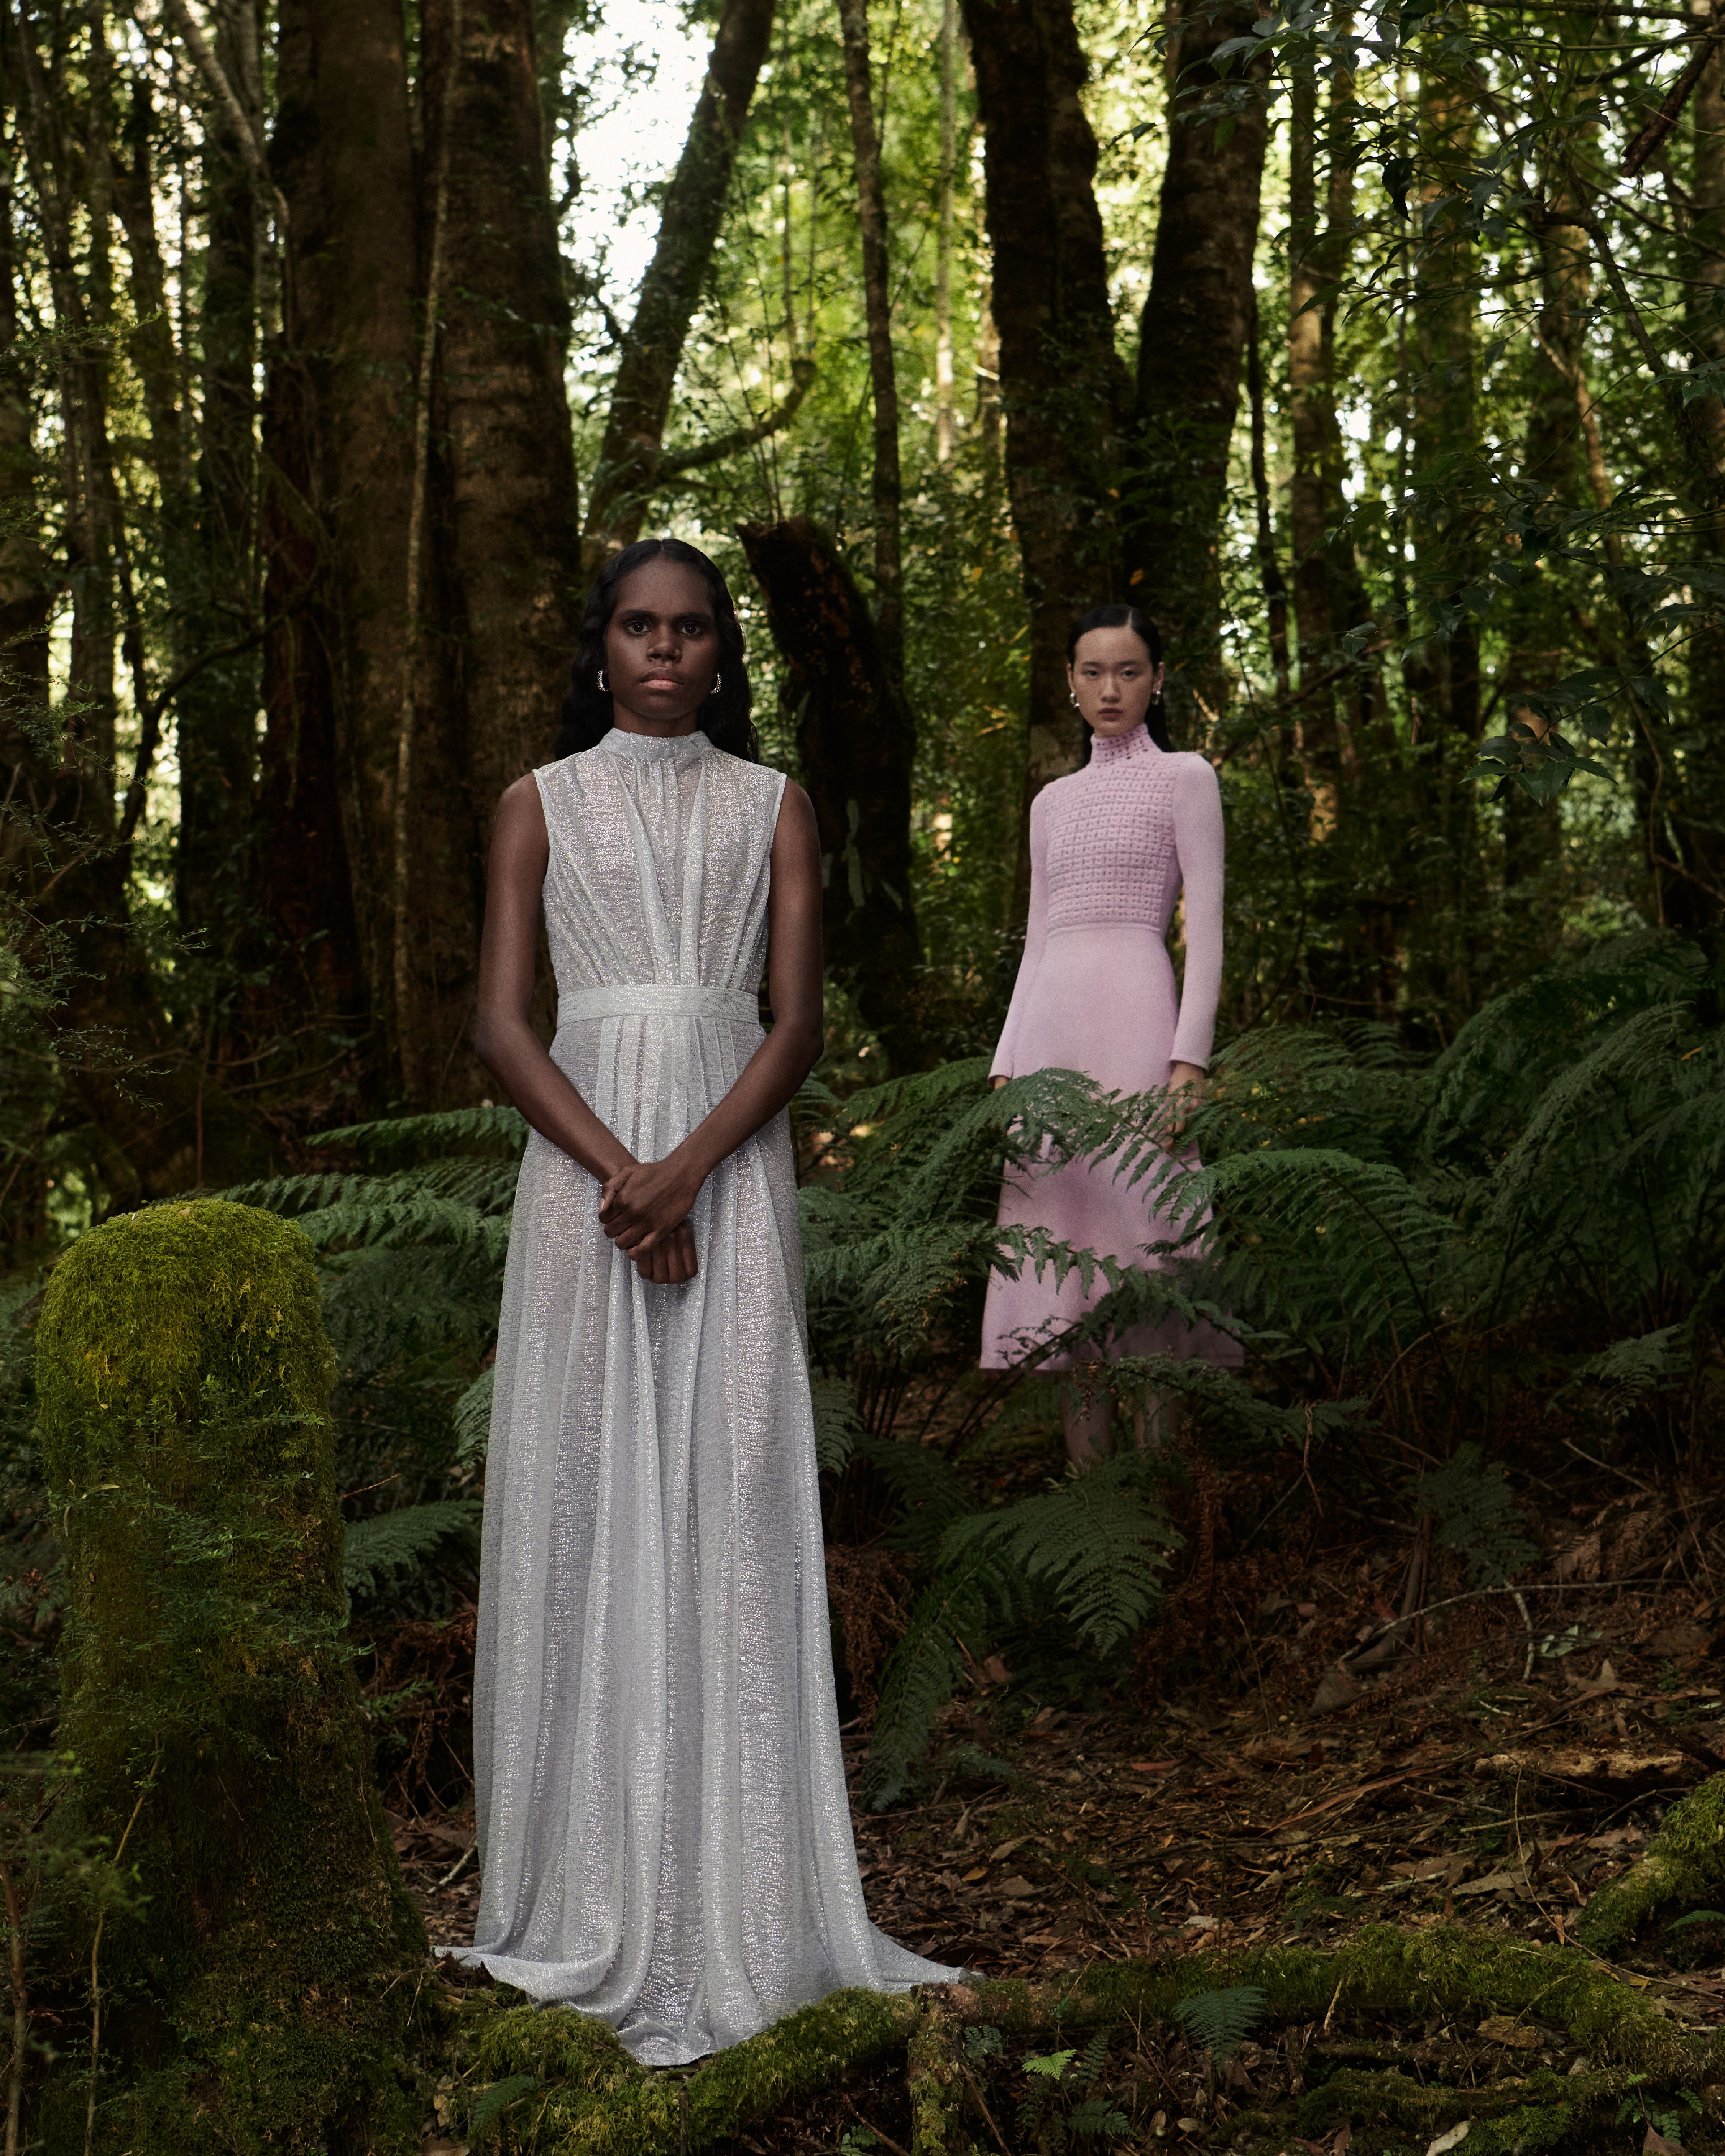 Tarlisa Gaykamangu and Venus He standing in the forest wearing a silver gown and pink dress